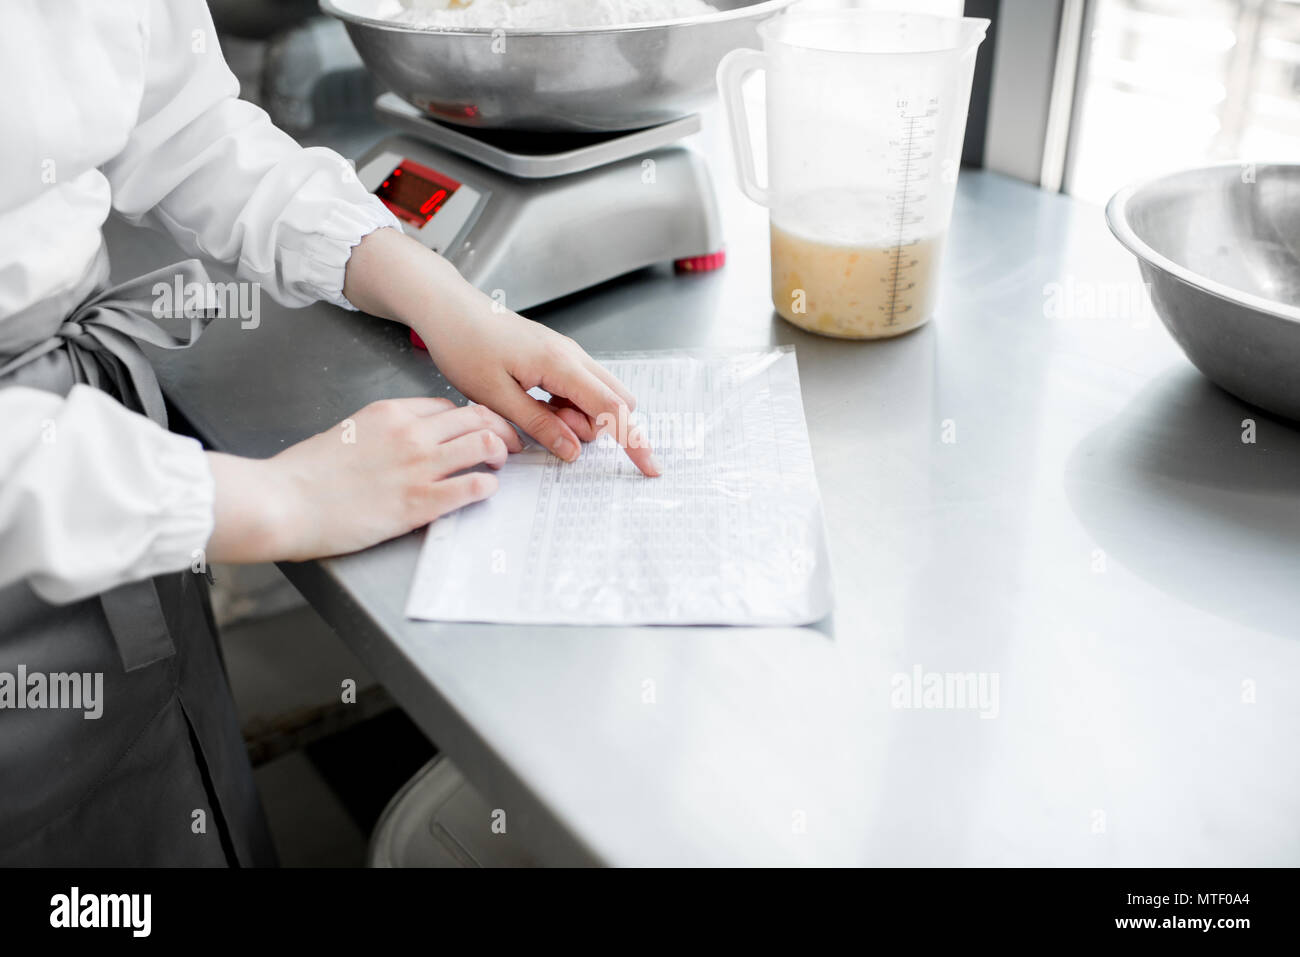 Looking on the technological card baking pastry at the manufacturing, close-up view Stock Photo